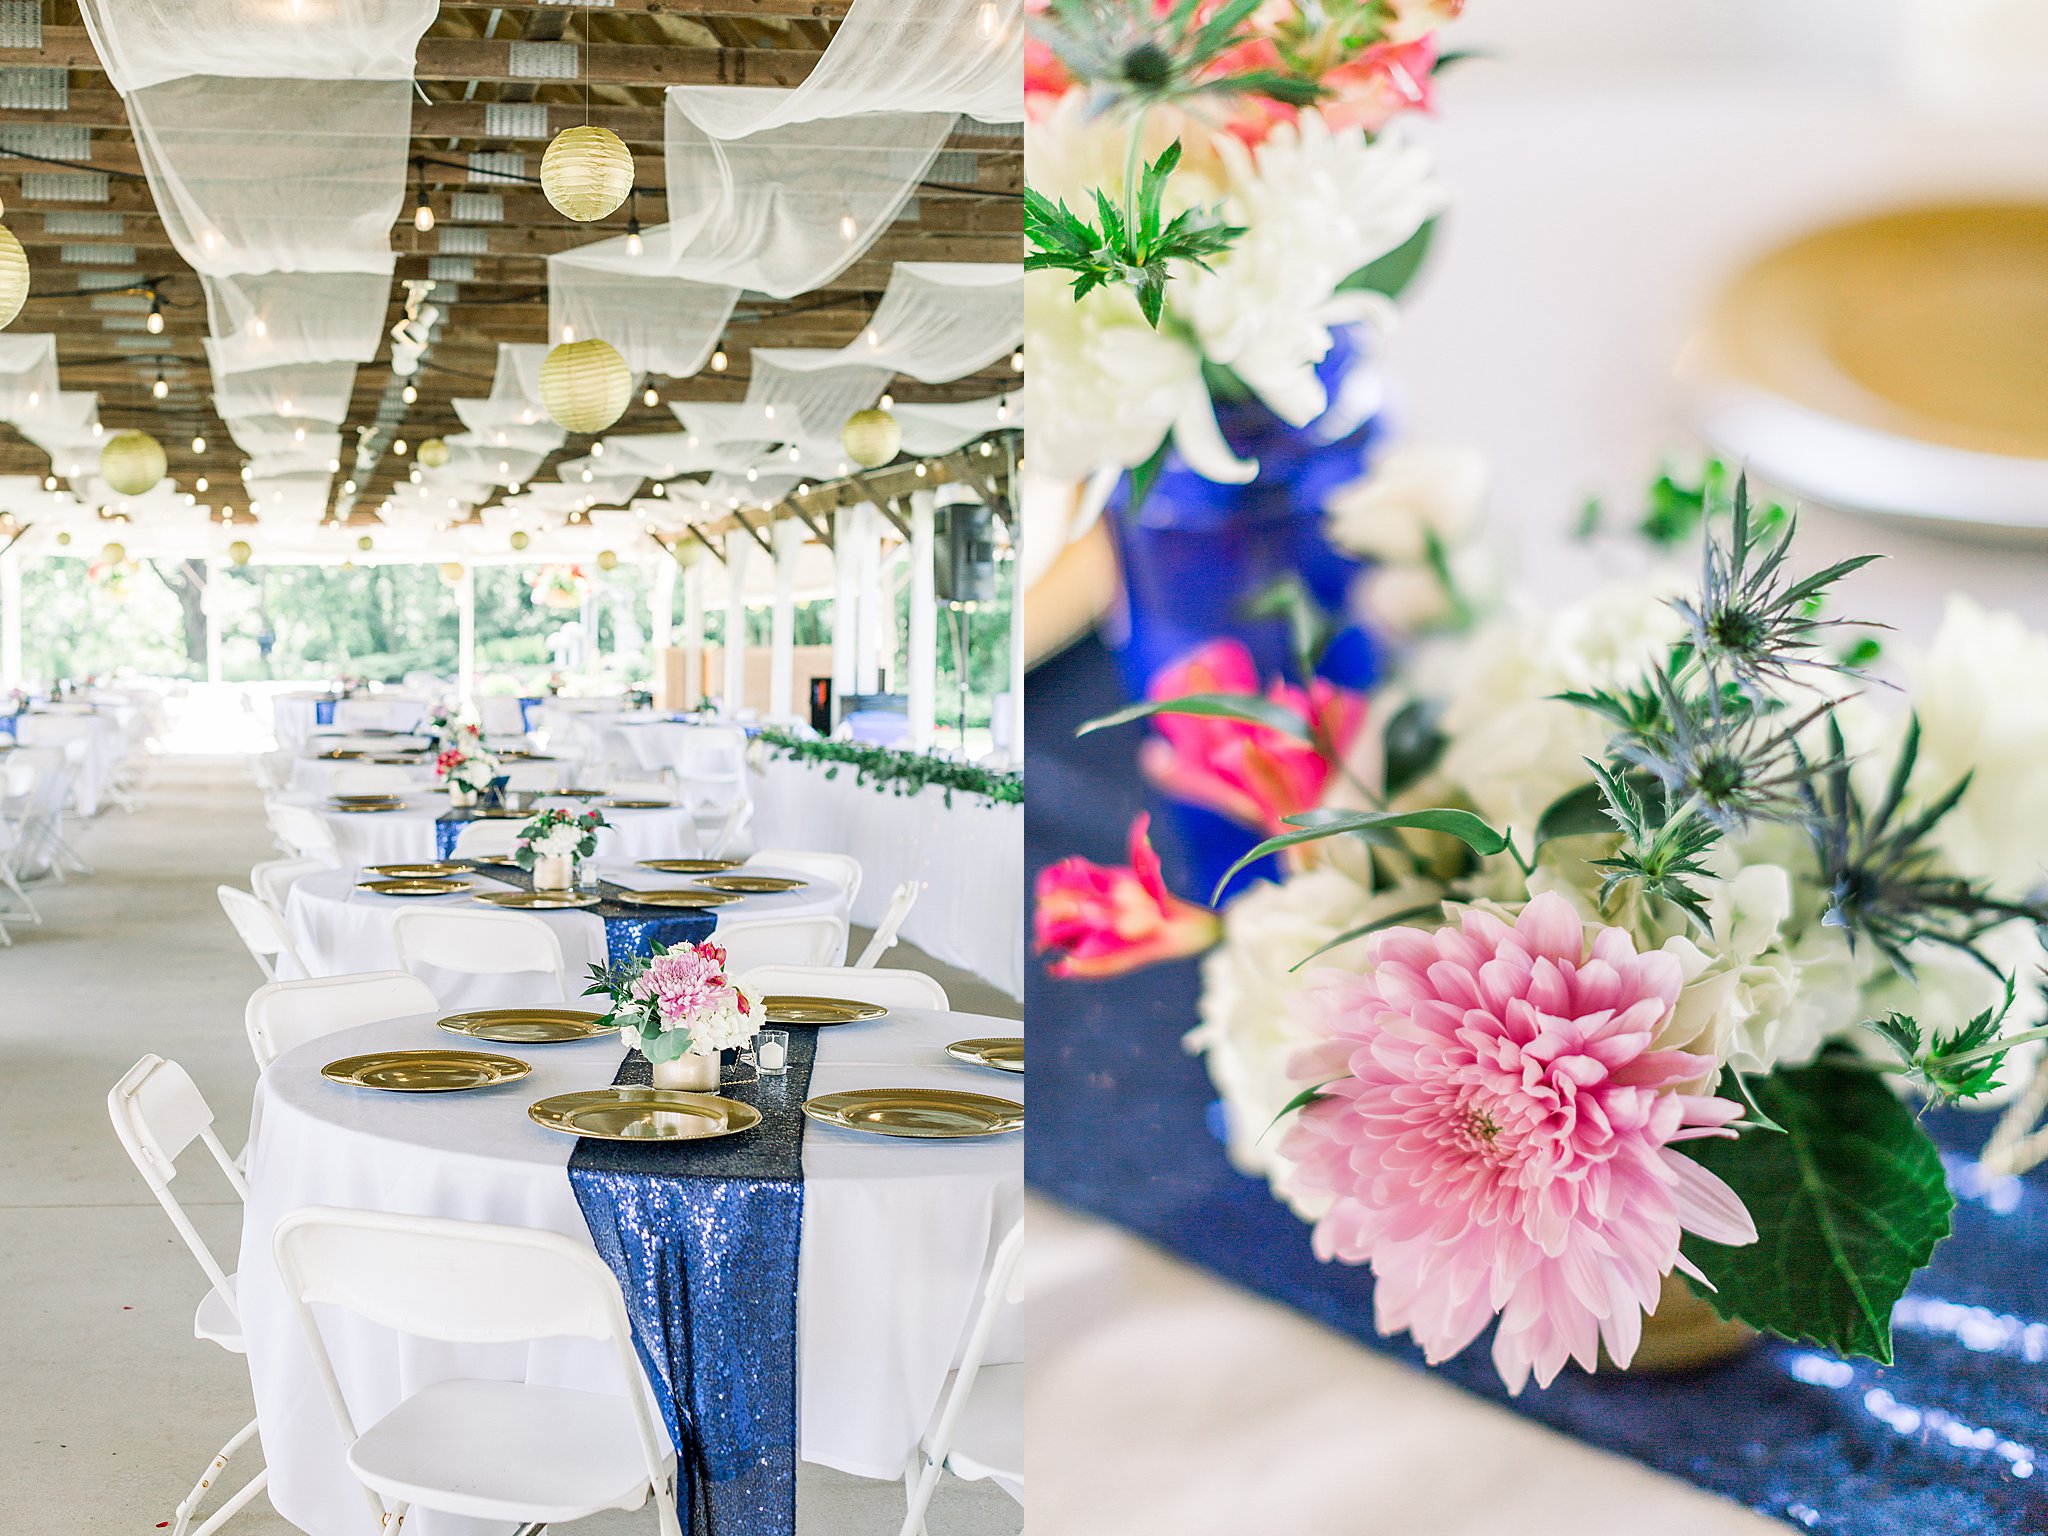 Reception setup and florals for Post Family Farm Wedding